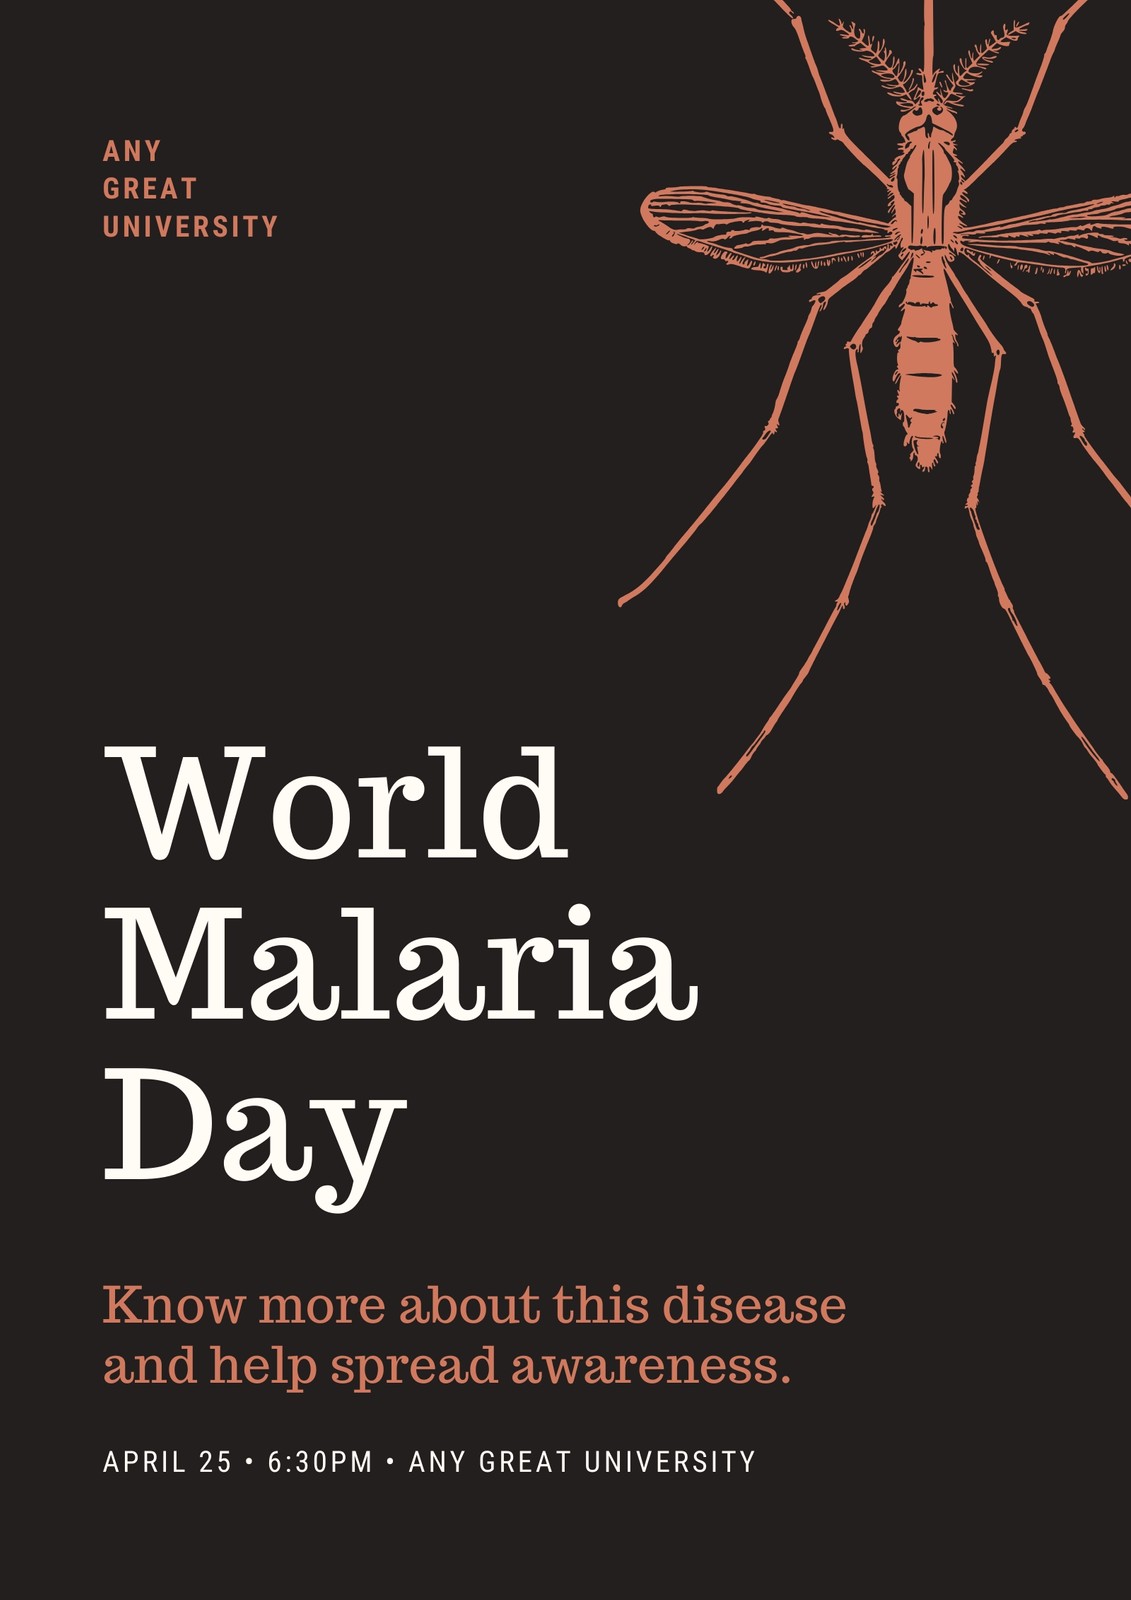 Customize 32+ World Malaria Day Posters Templates Online Canva